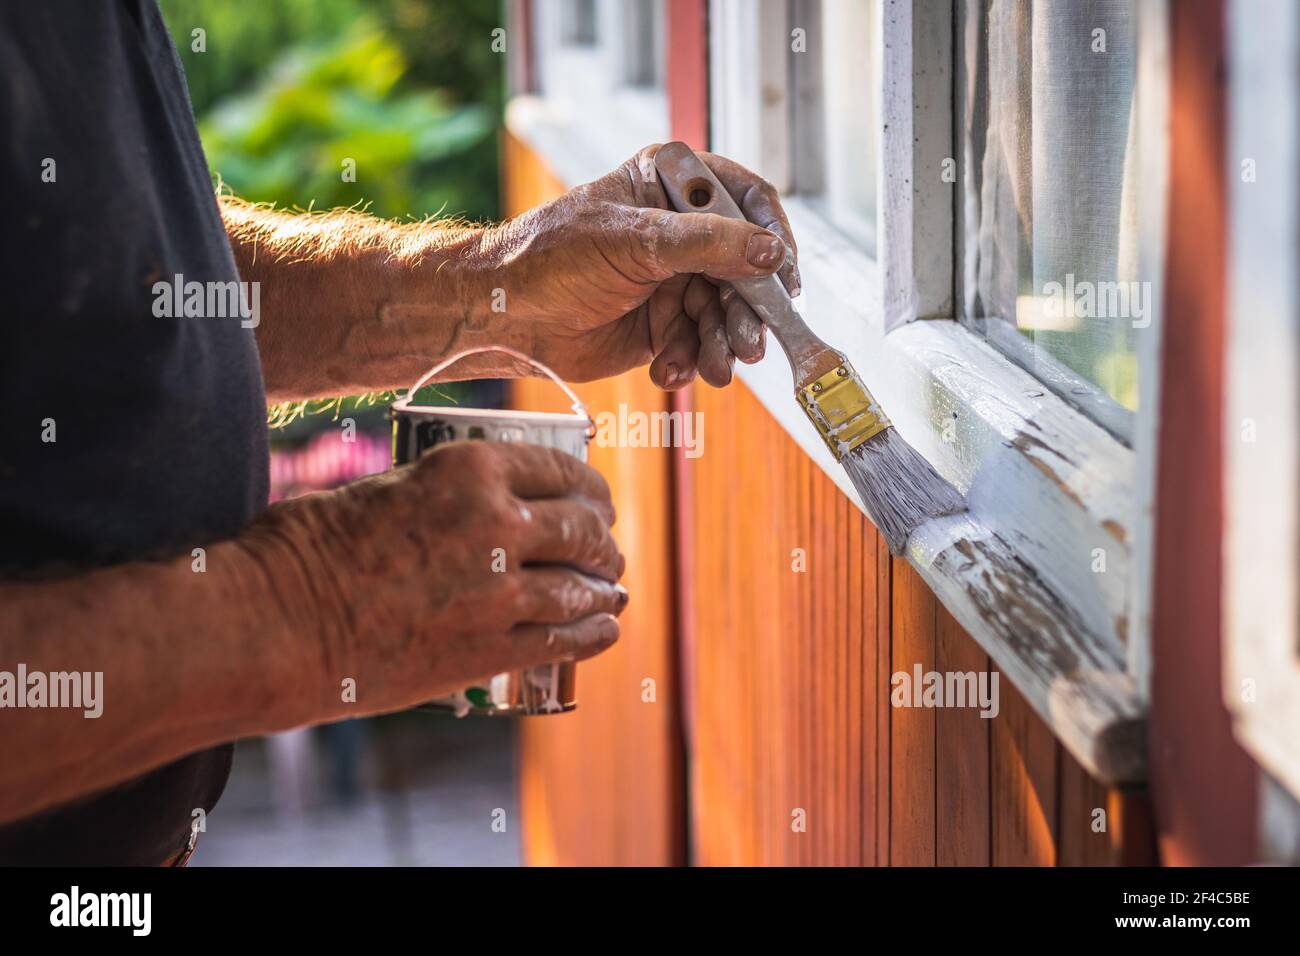 House improvement. Senior craftsperson is painting wooden window frame using paintbrush. Old man working outdoors. Stock Photo